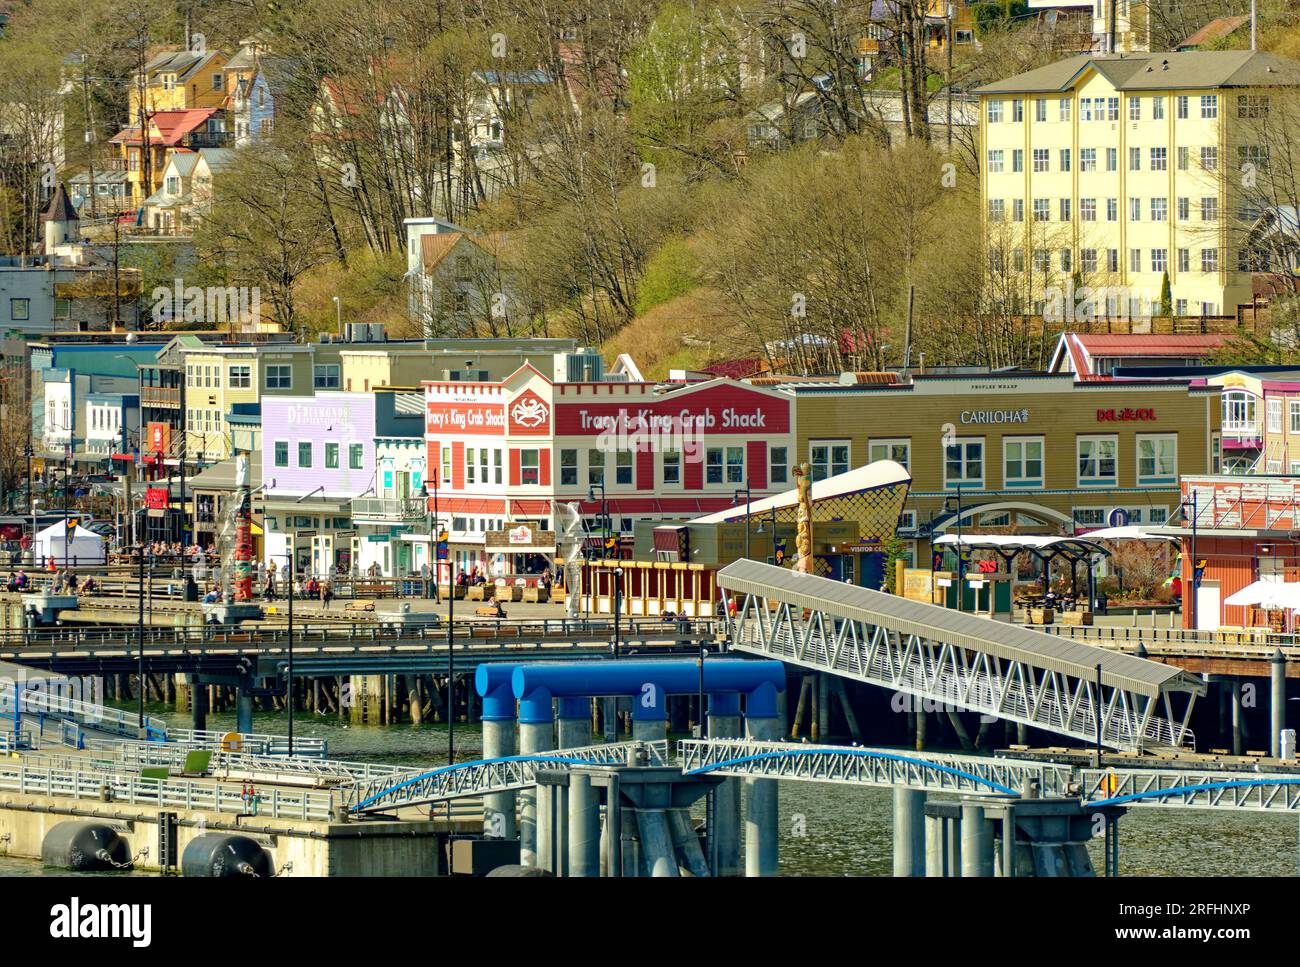 JUNEAU, ALASKA- May 6, 2023: The City of Juneau is the capital city of Alaska. Juneau's population can increase by roughly 6,000 people from cruise sh Stock Photo